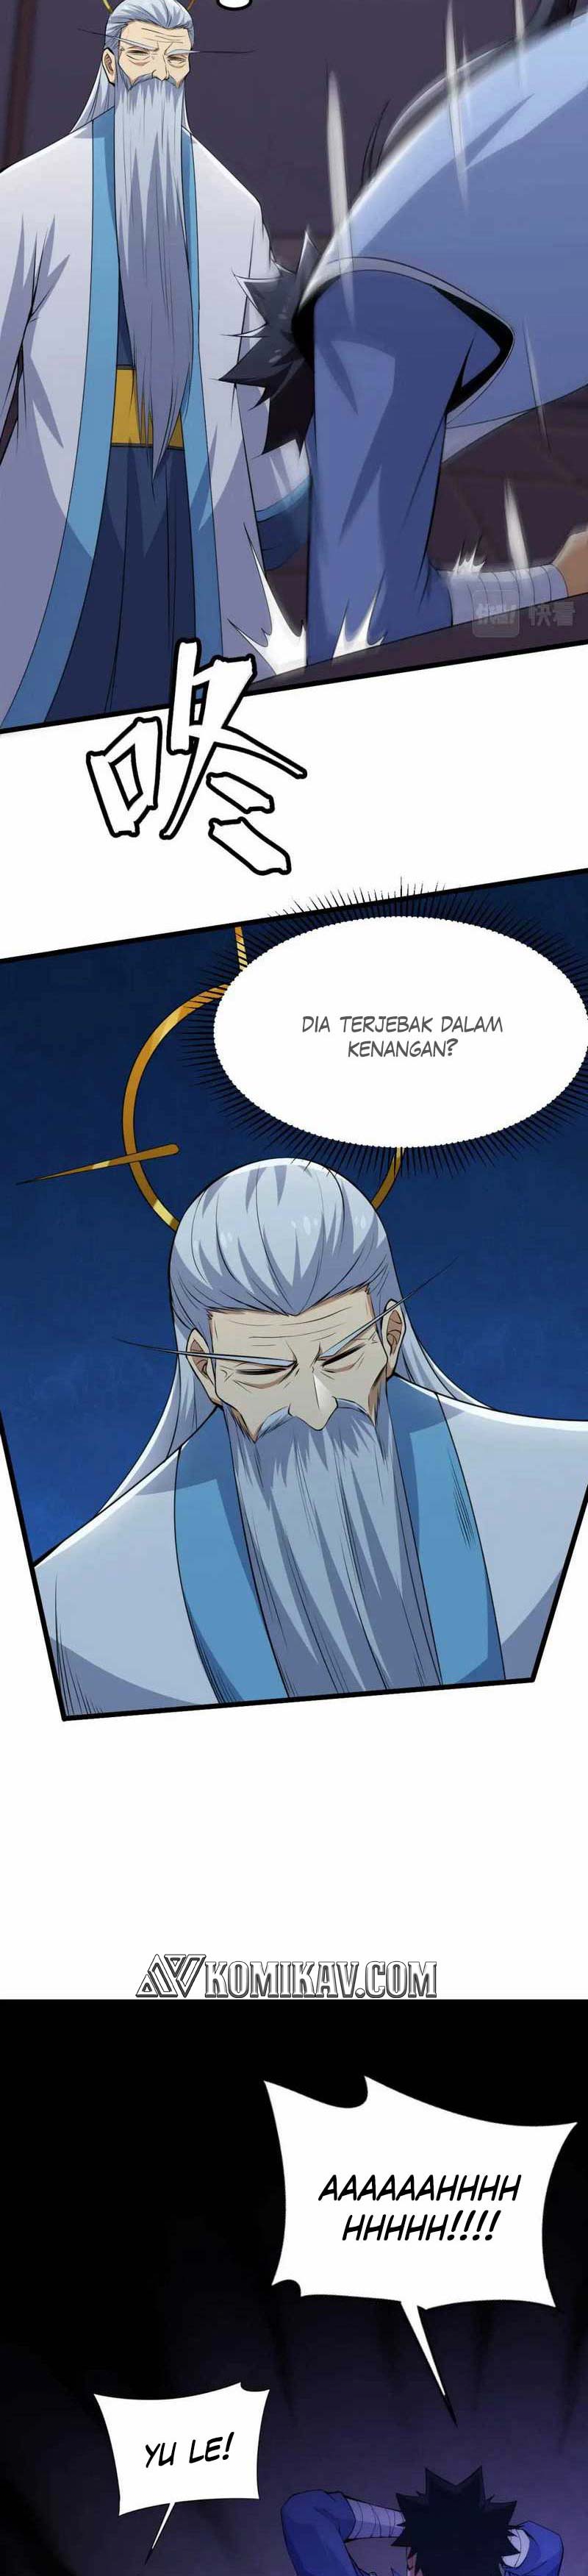 Dilarang COPAS - situs resmi www.mangacanblog.com - Komik i just want to be beaten to death by everyone 124 - chapter 124 125 Indonesia i just want to be beaten to death by everyone 124 - chapter 124 Terbaru 8|Baca Manga Komik Indonesia|Mangacan